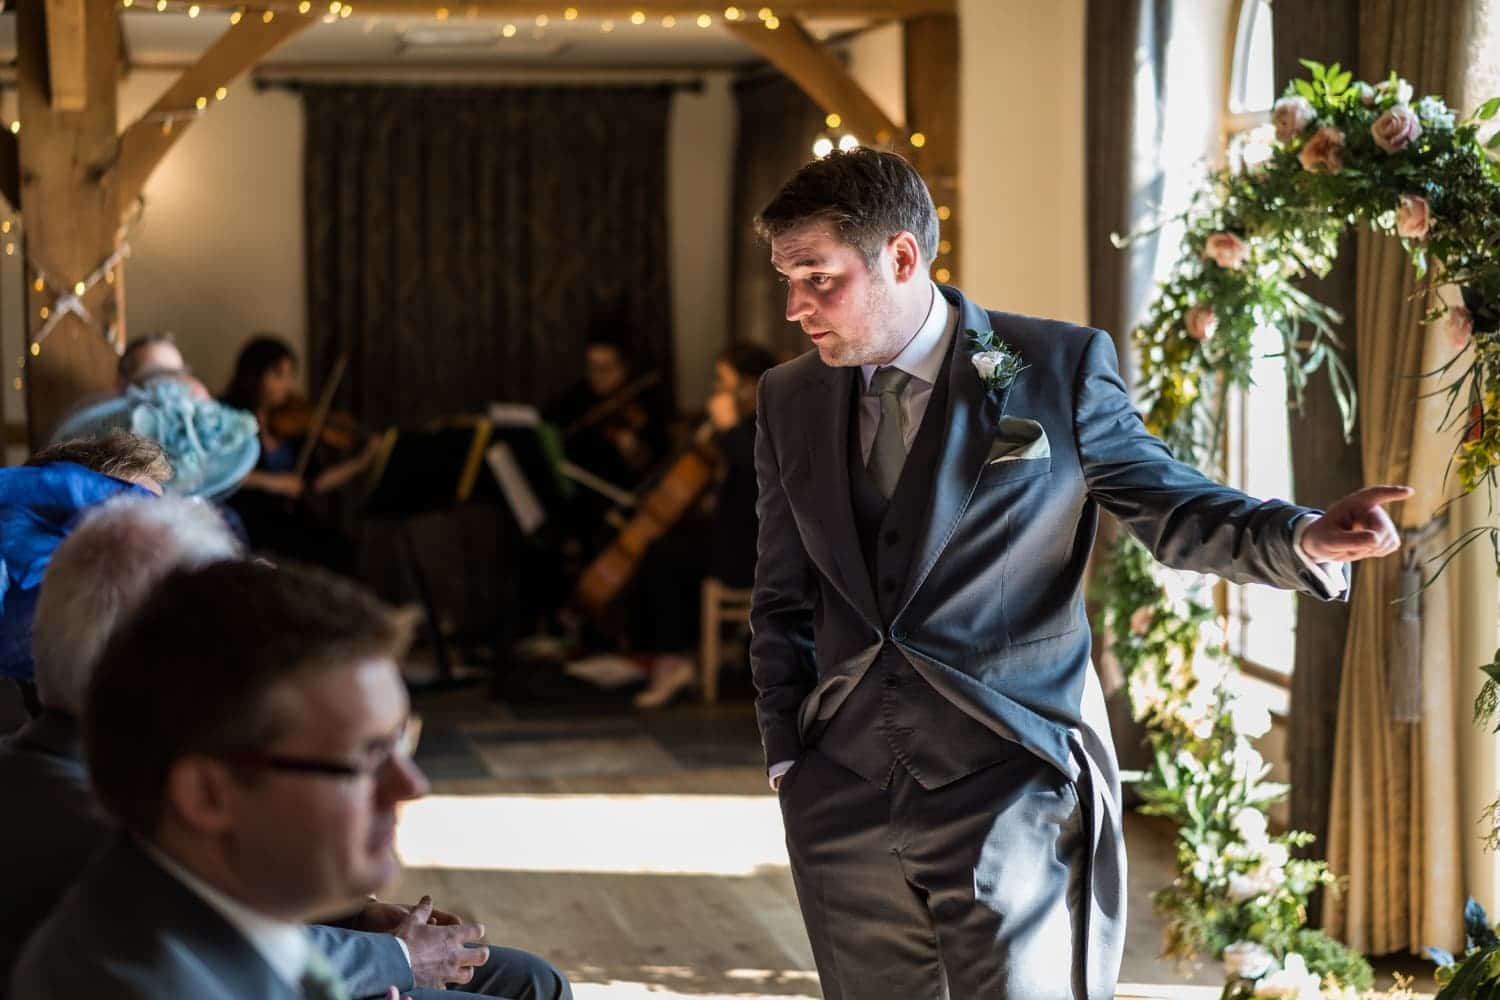 Groom waiting for bride at King Arthur Hotel in Gower, South Wales